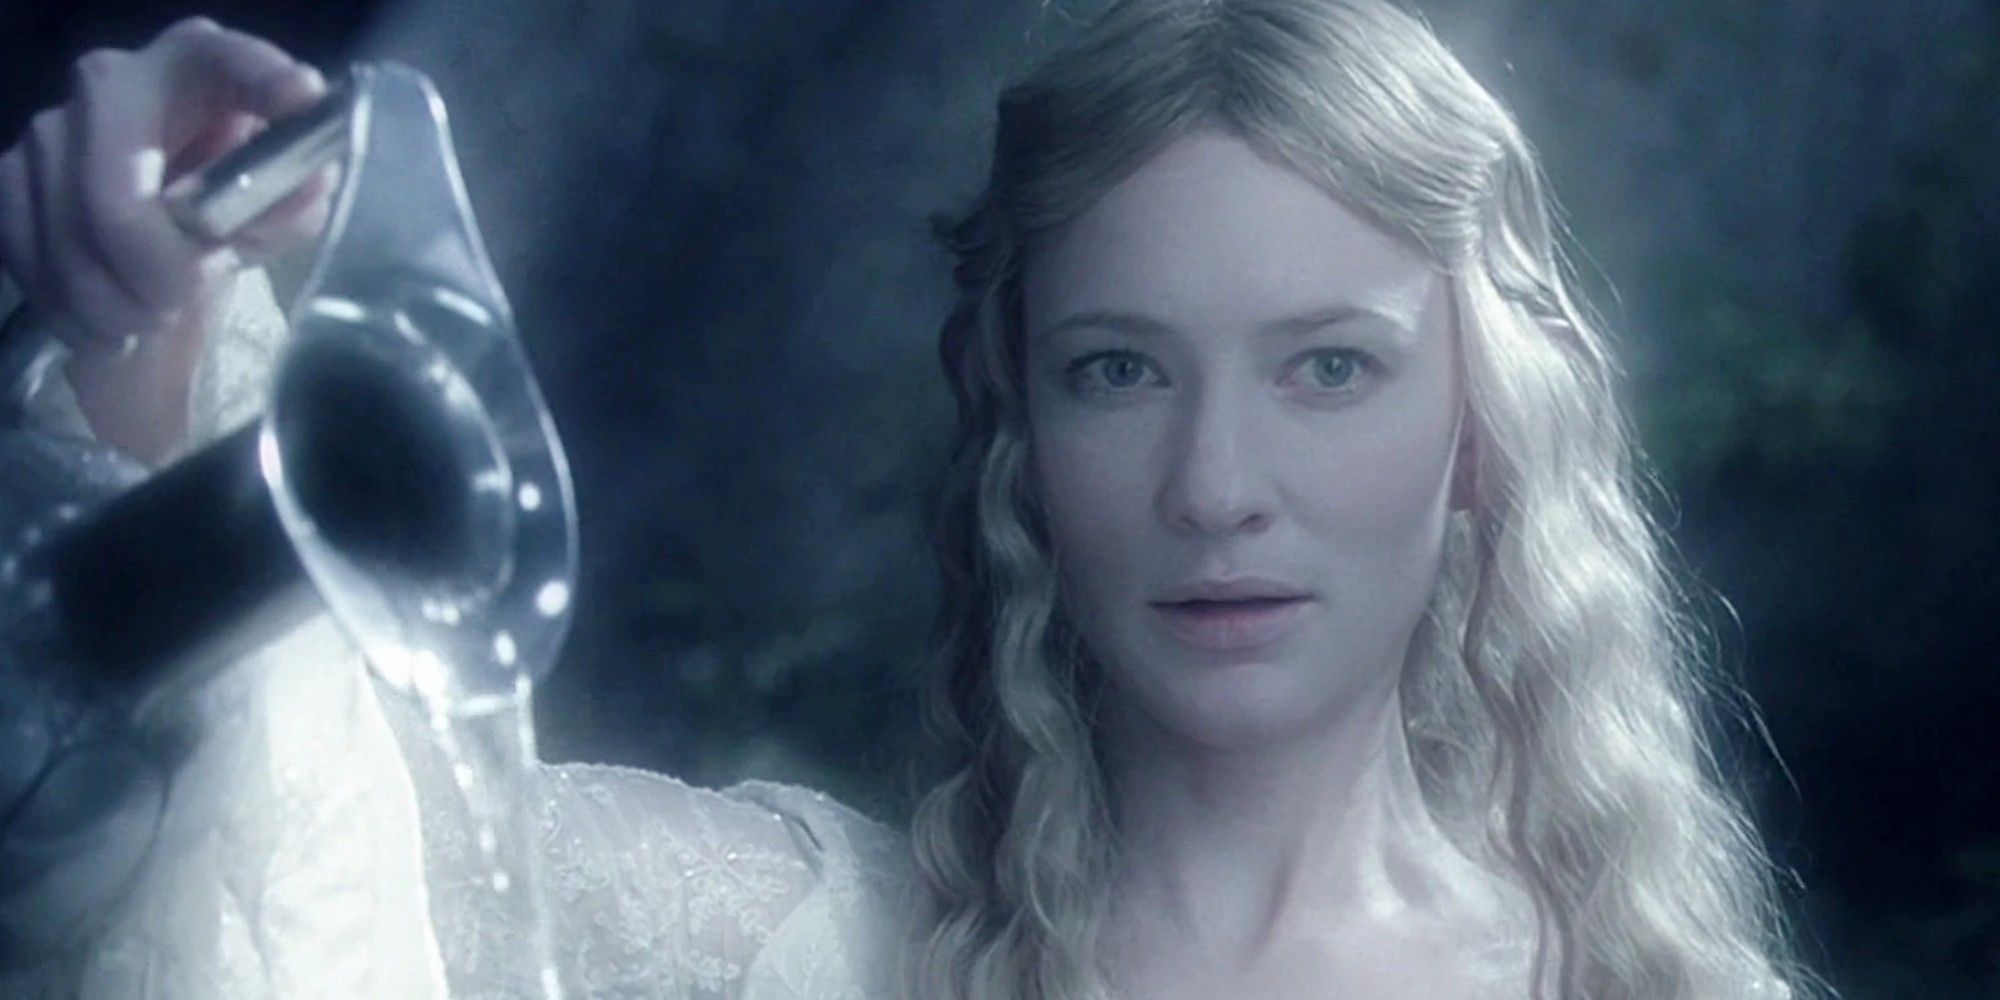 Galadriel pouring water from a pitcher in The Lord of the Rings. 